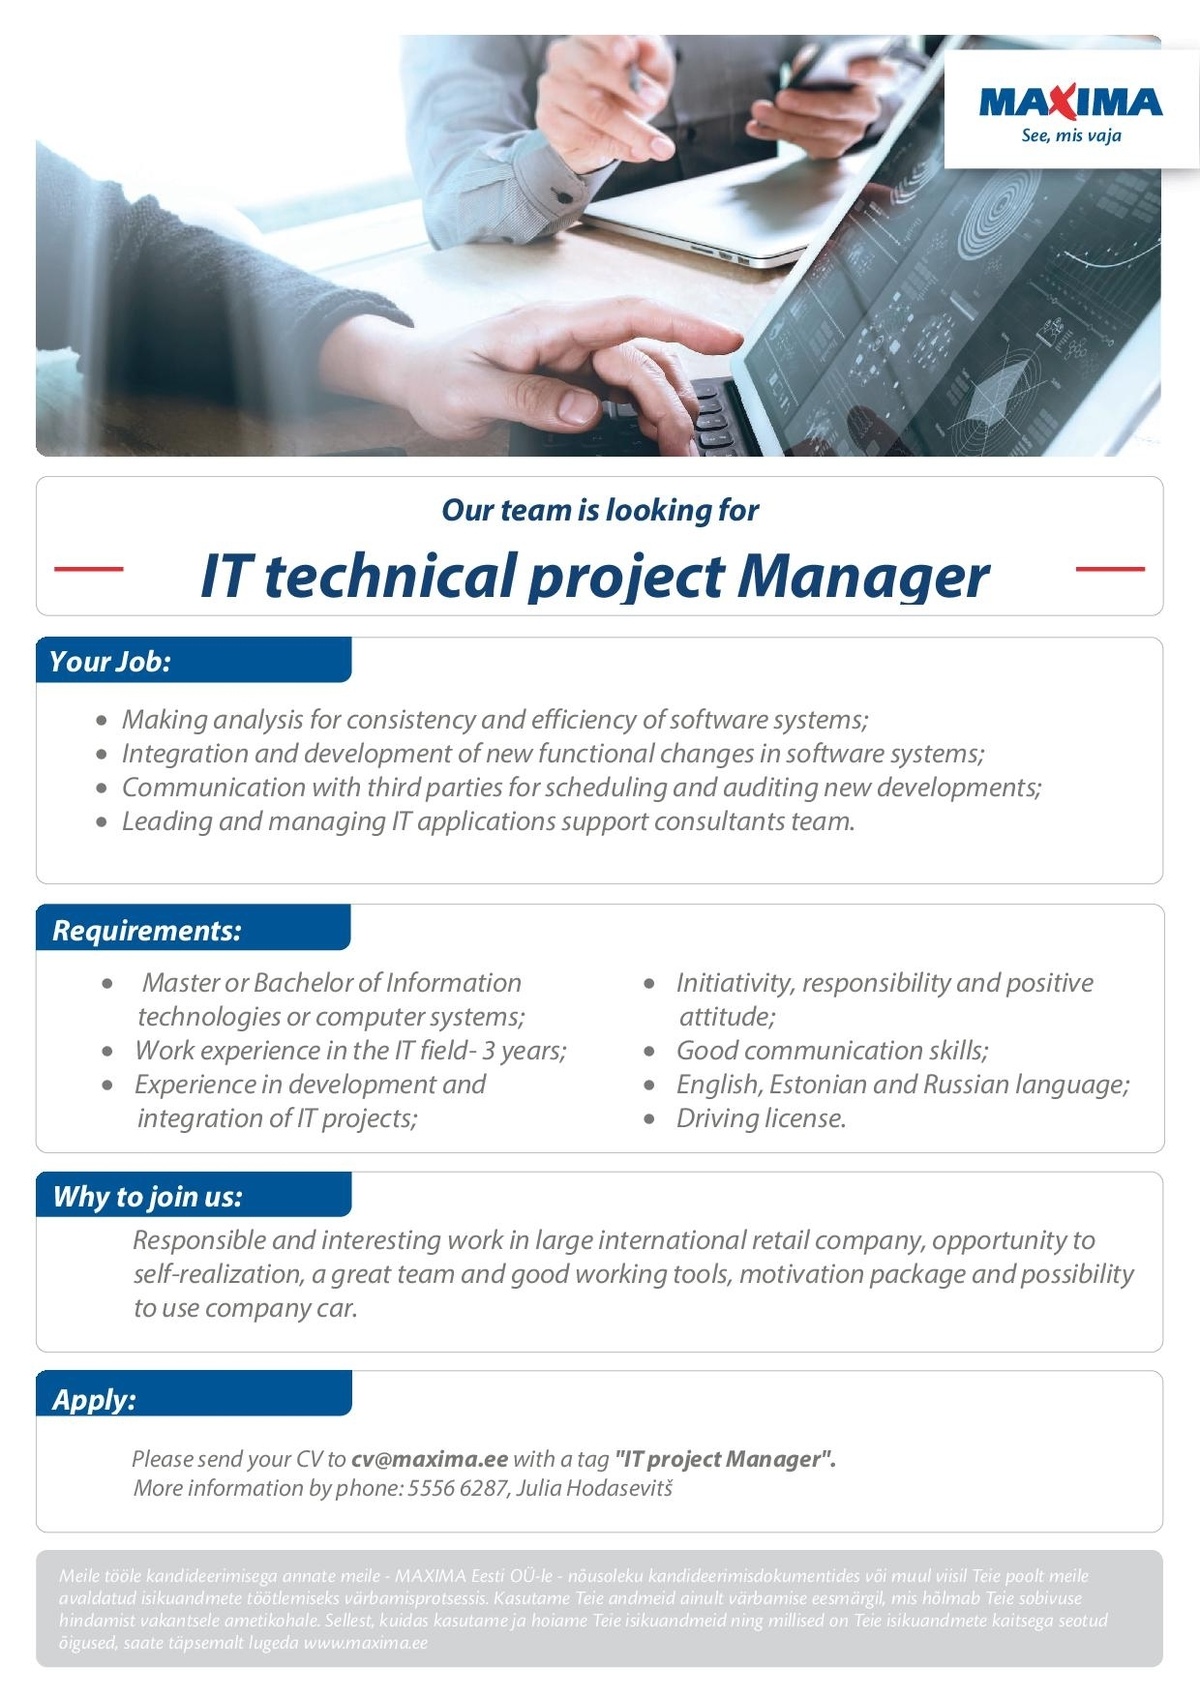 Maxima Eesti OÜ IT technical project Manager